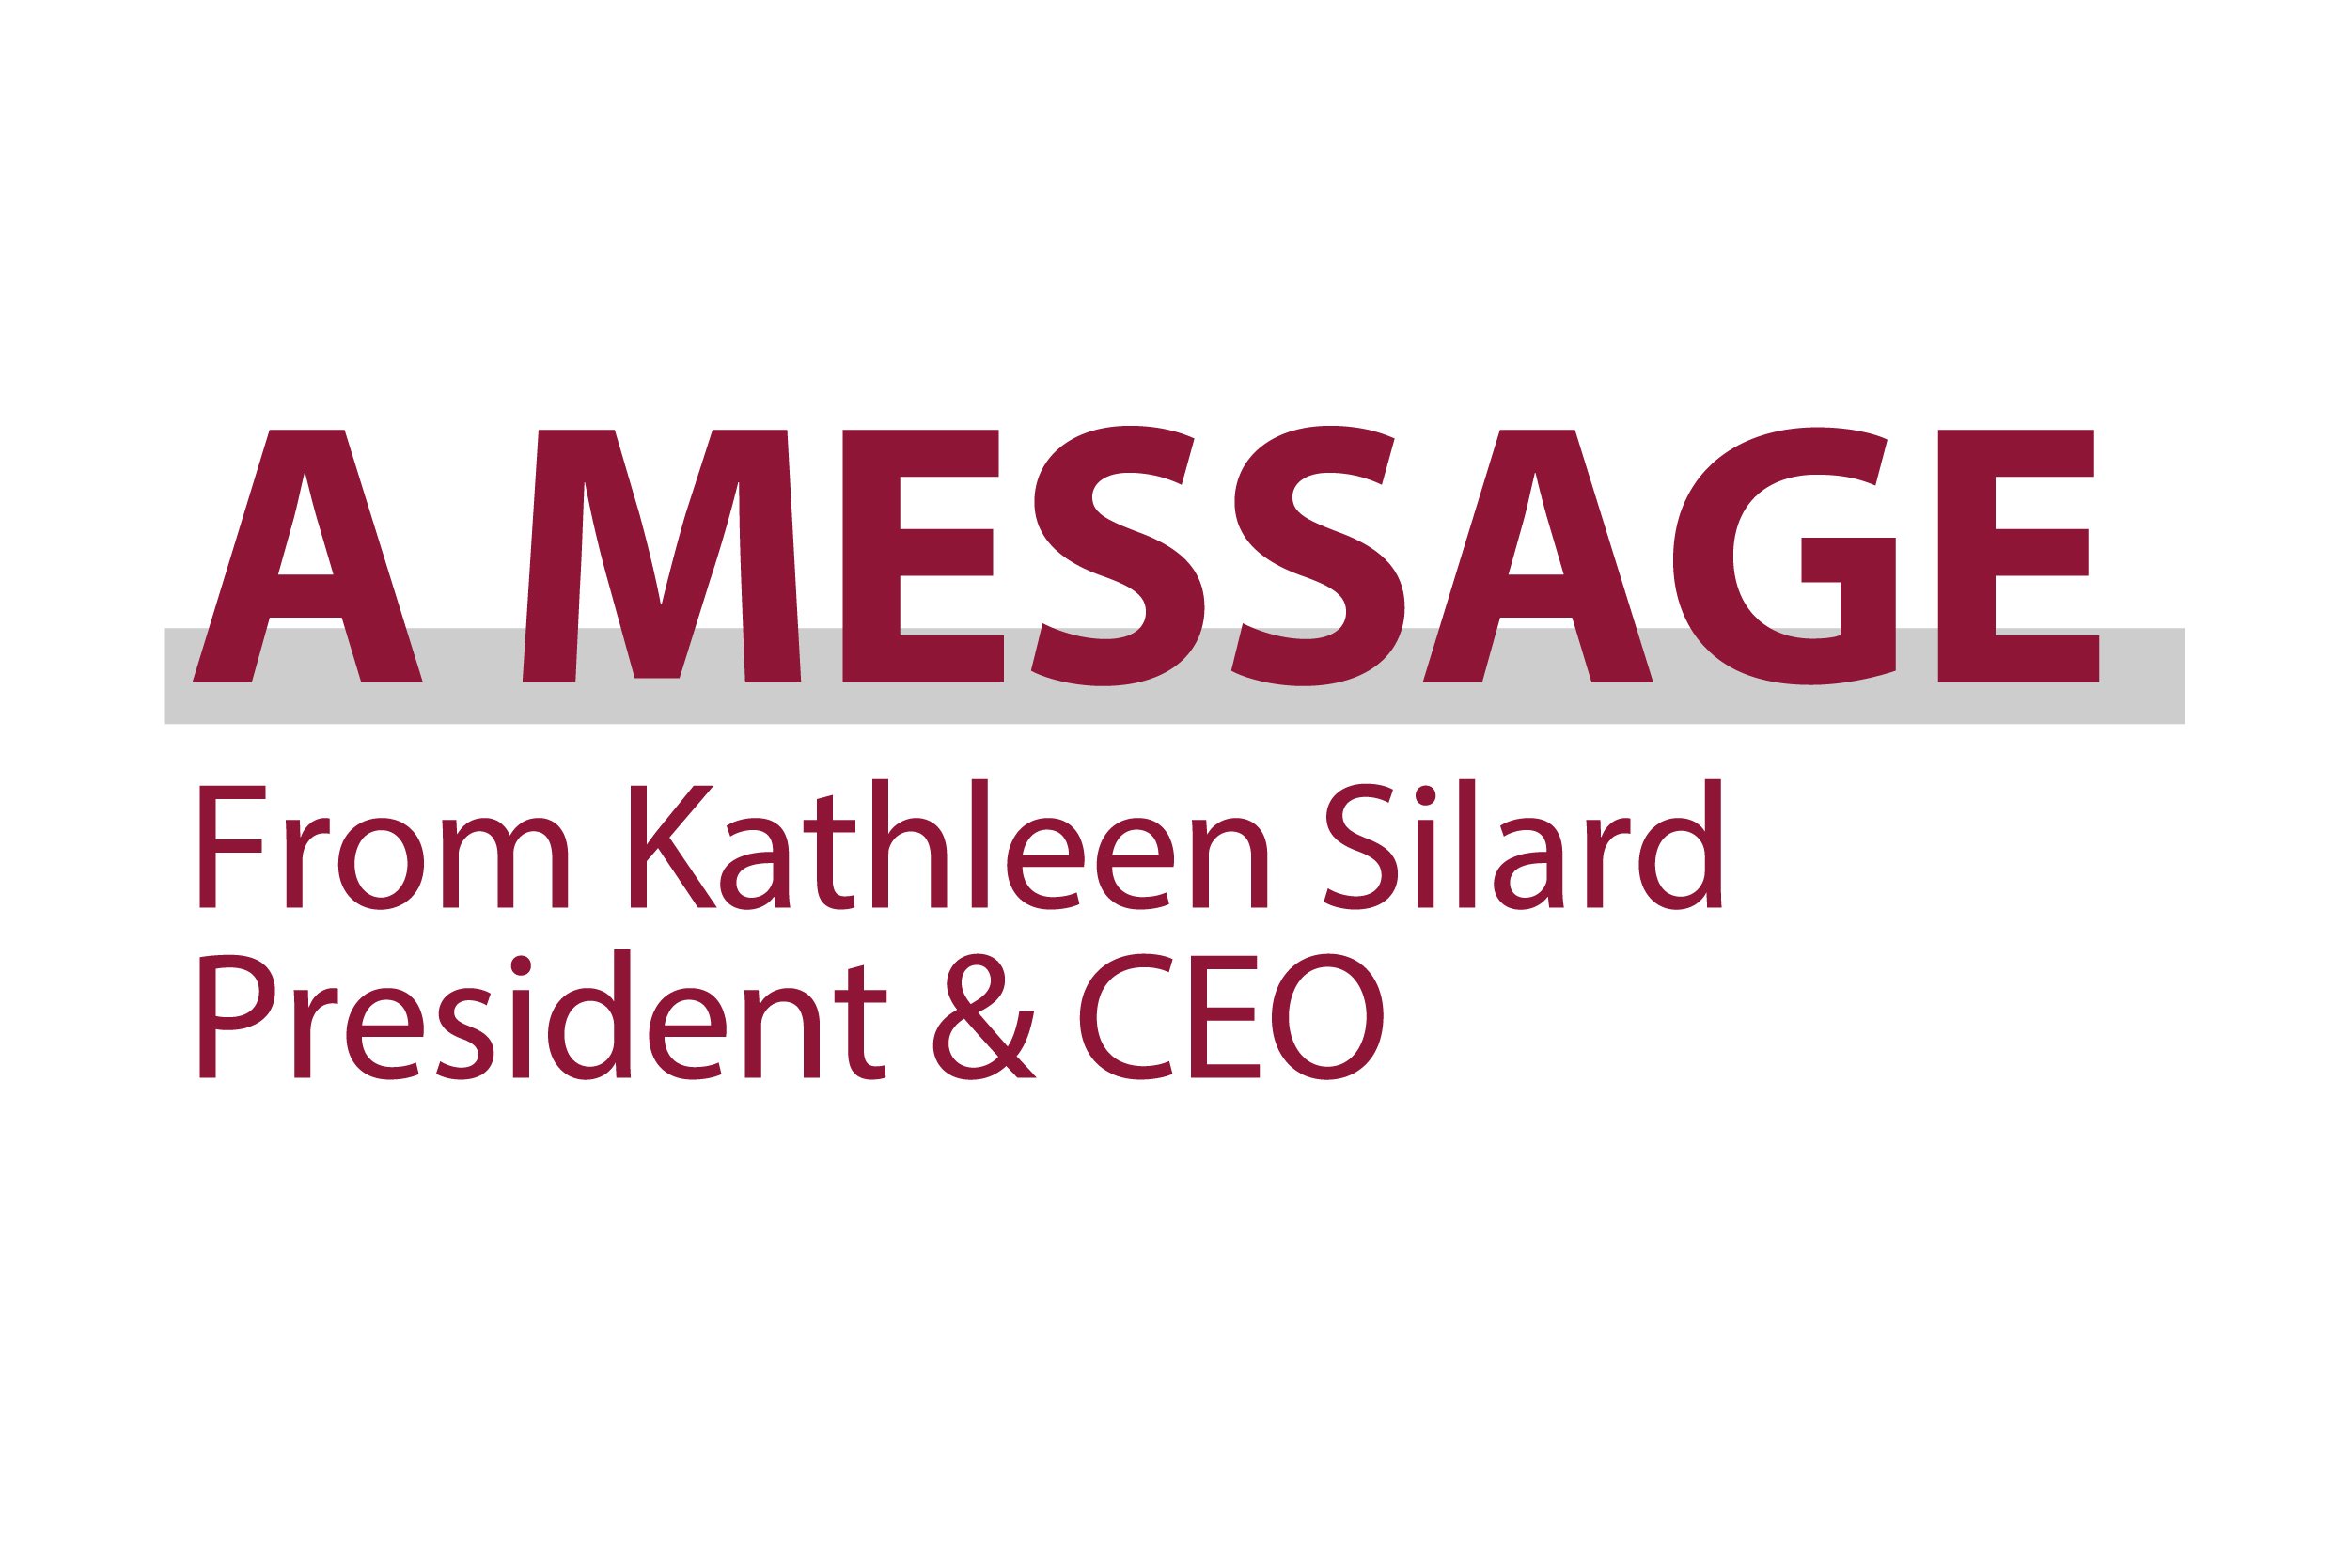 Message from Kathleen Silard, President & CEO